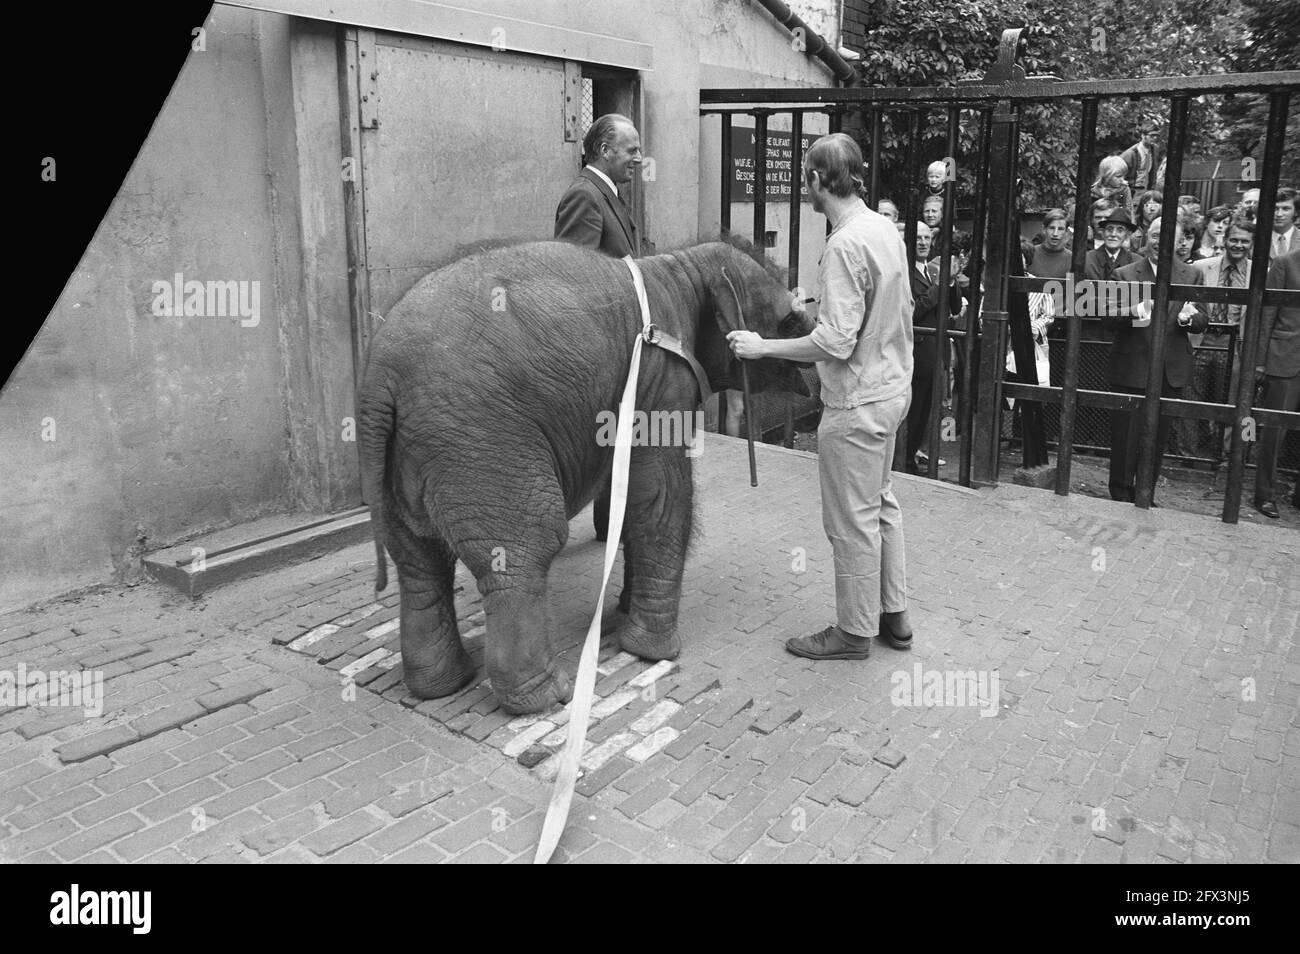 Modernization elephant enclosures in Artis, Mr. Fock gives piece of bread to elephant, July 26, 1972, zoos, modernizations, The Netherlands, 20th century press agency photo, news to remember, documentary, historic photography 1945-1990, visual stories, human history of the Twentieth Century, capturing moments in time Stock Photo